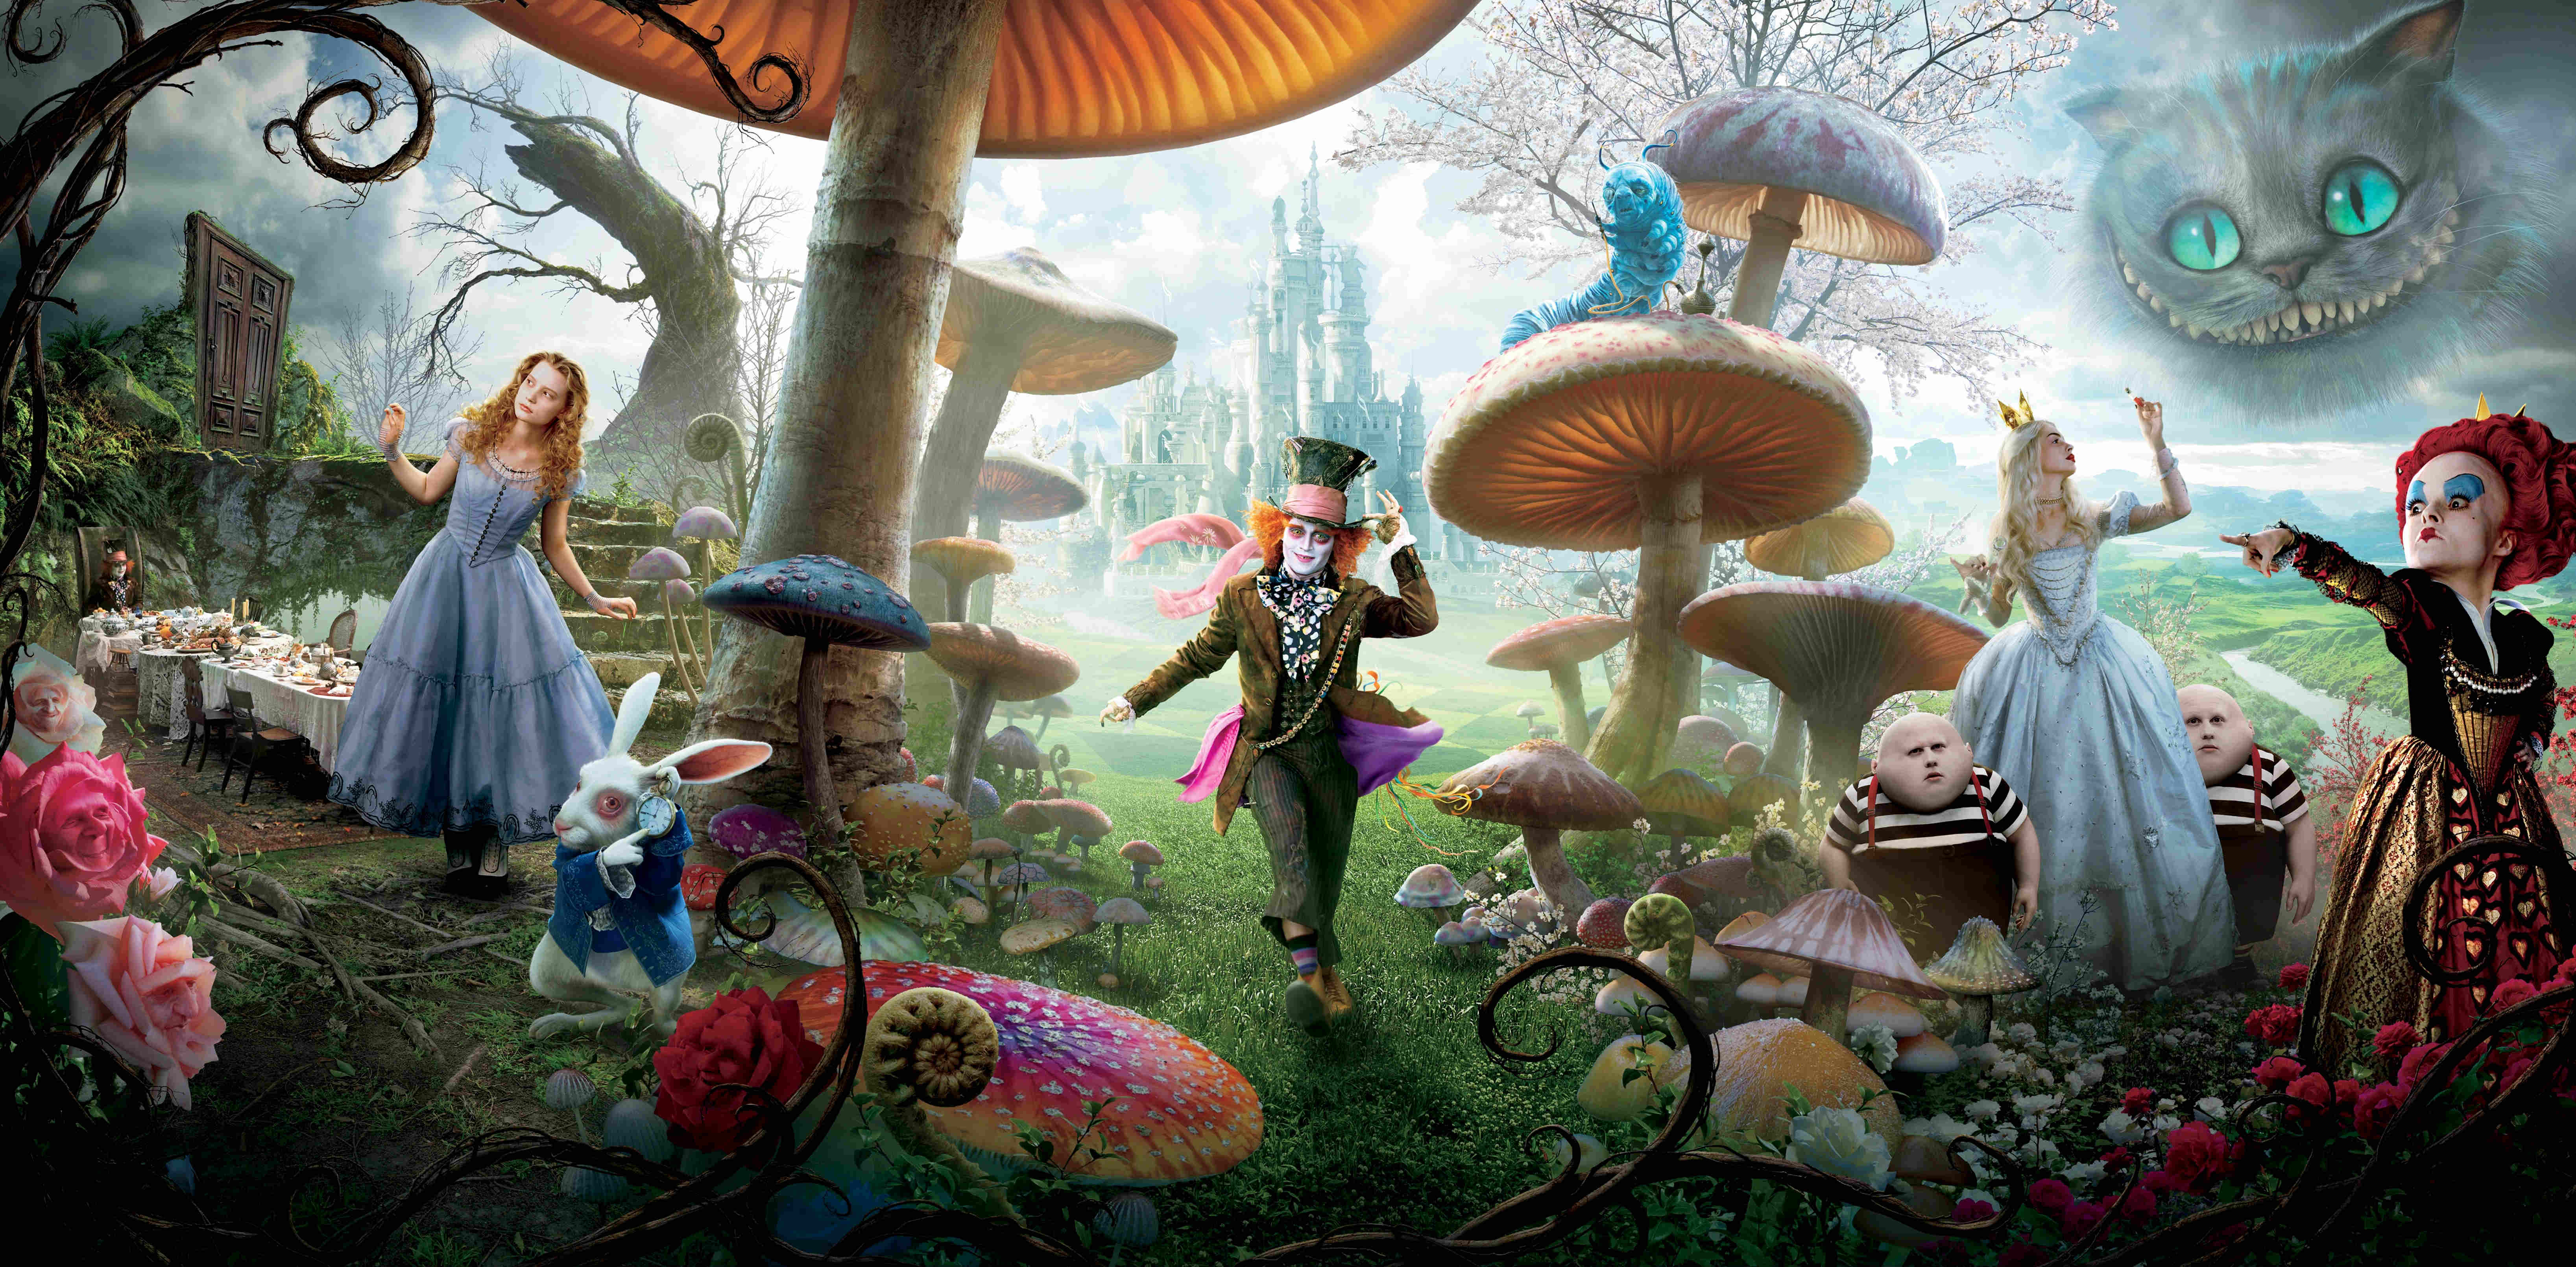 Geek insider, geekinsider, geekinsider. Com,, a new director in the cards for the 'alice in wonderland' sequel, entertainment